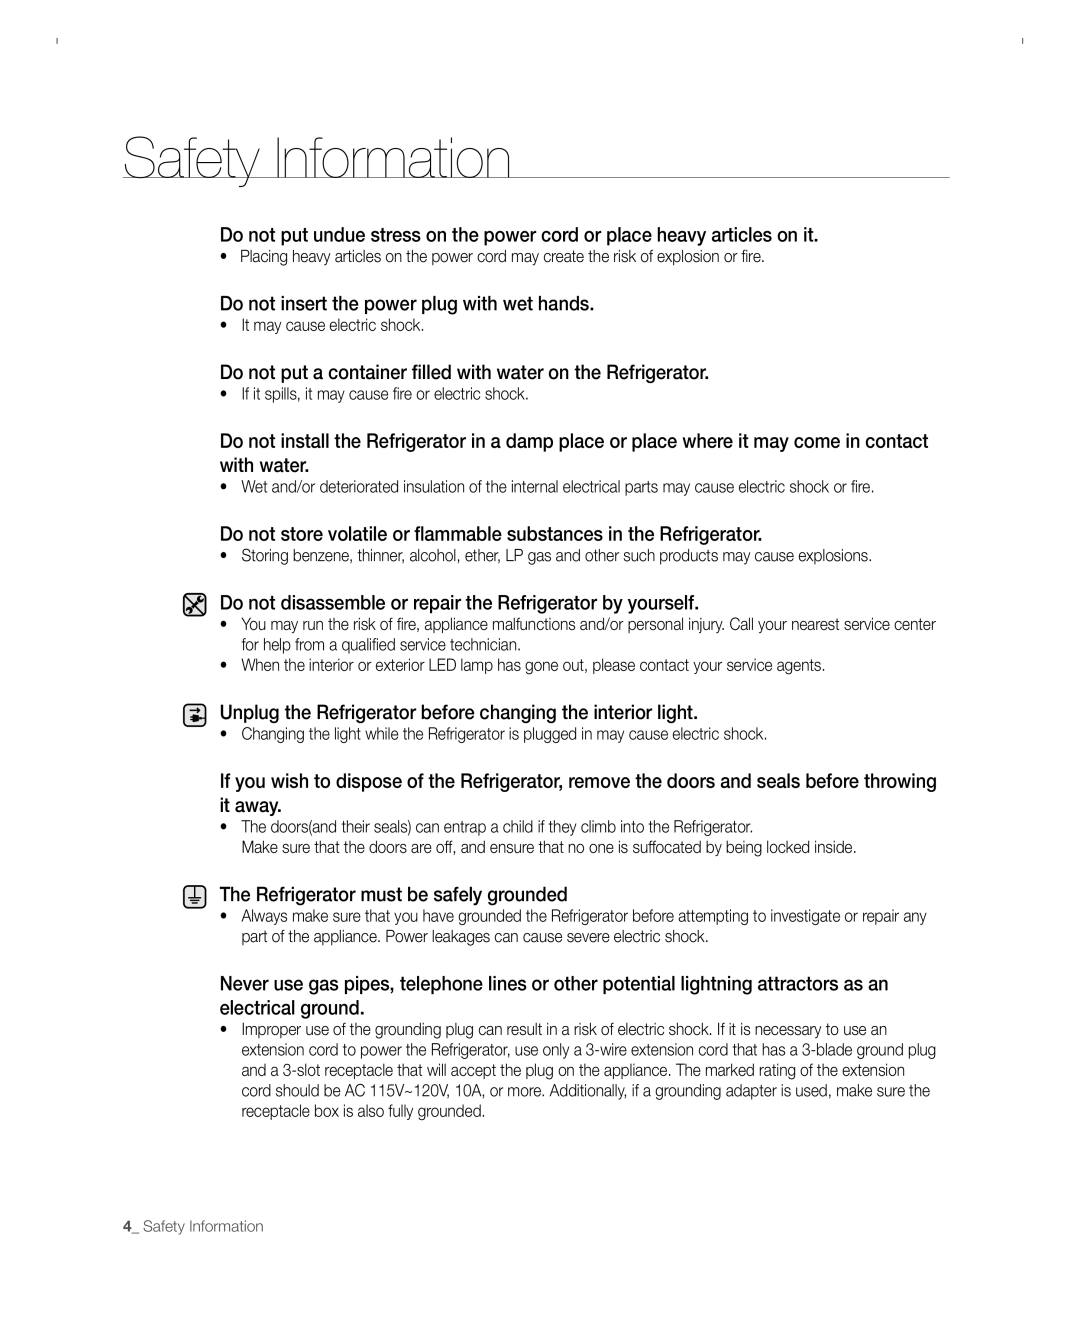 Samsung RFG297ACBP user manual Safety Information, Do not insert the power plug with wet hands 